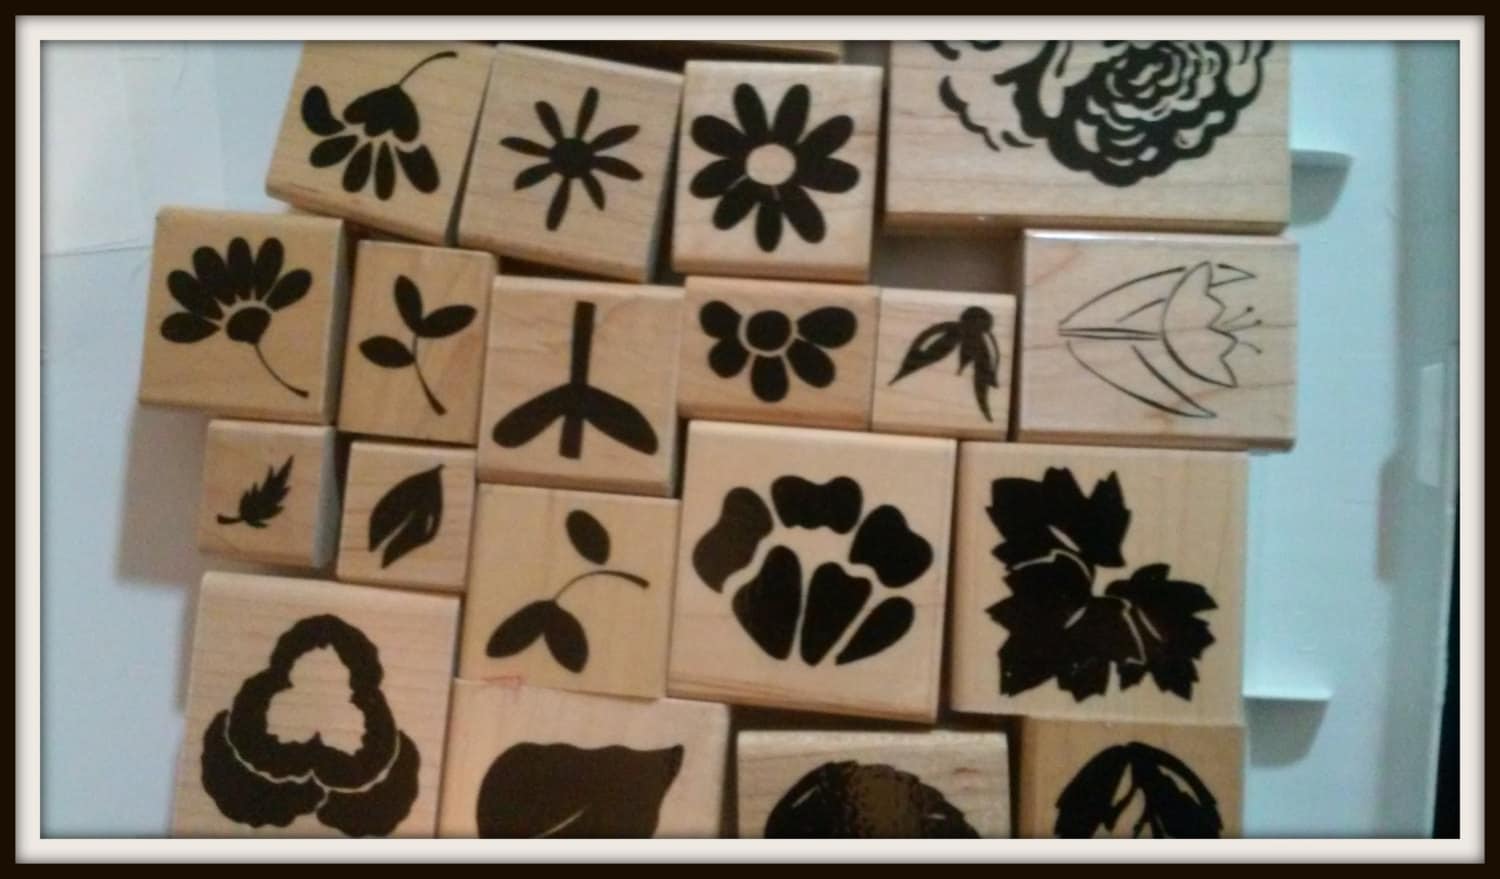 Lot Of 28 Wooden Rubber Stamps For Scrapbooking Or Paper Crafting All